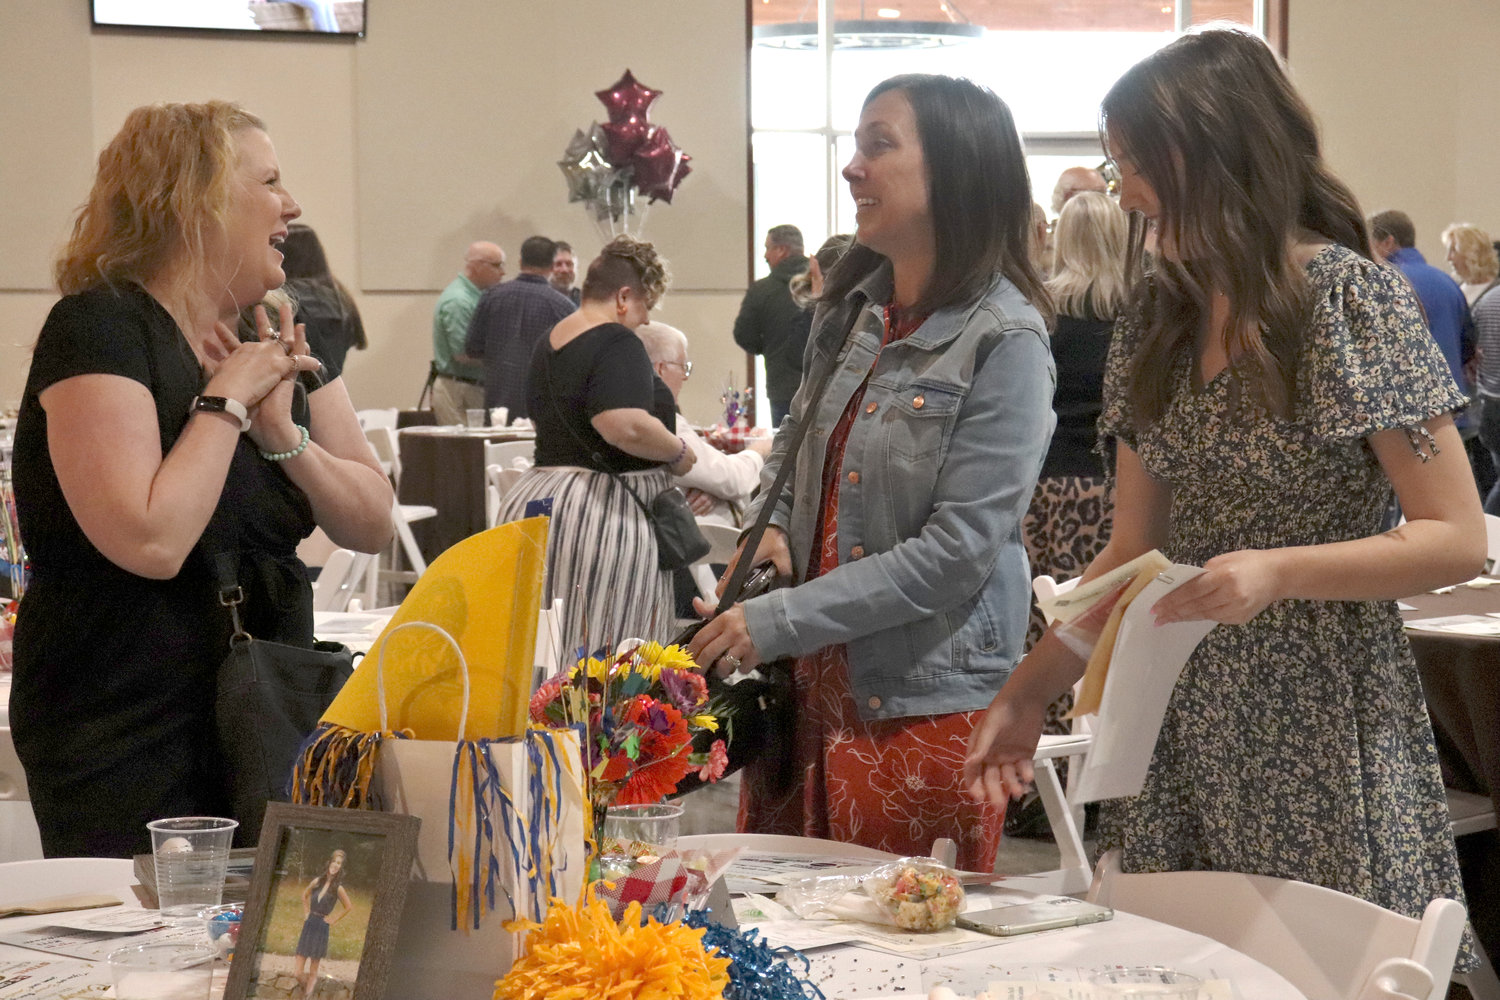 Suzie Mitchell, left, speaks with Olivia Mitchell Scholarship recipient Alyssa Davis, far right, during the Rob Fuller Top 25 Scholarship Luncheon in Chehalis on Monday. The award was available to Adna High School seniors.